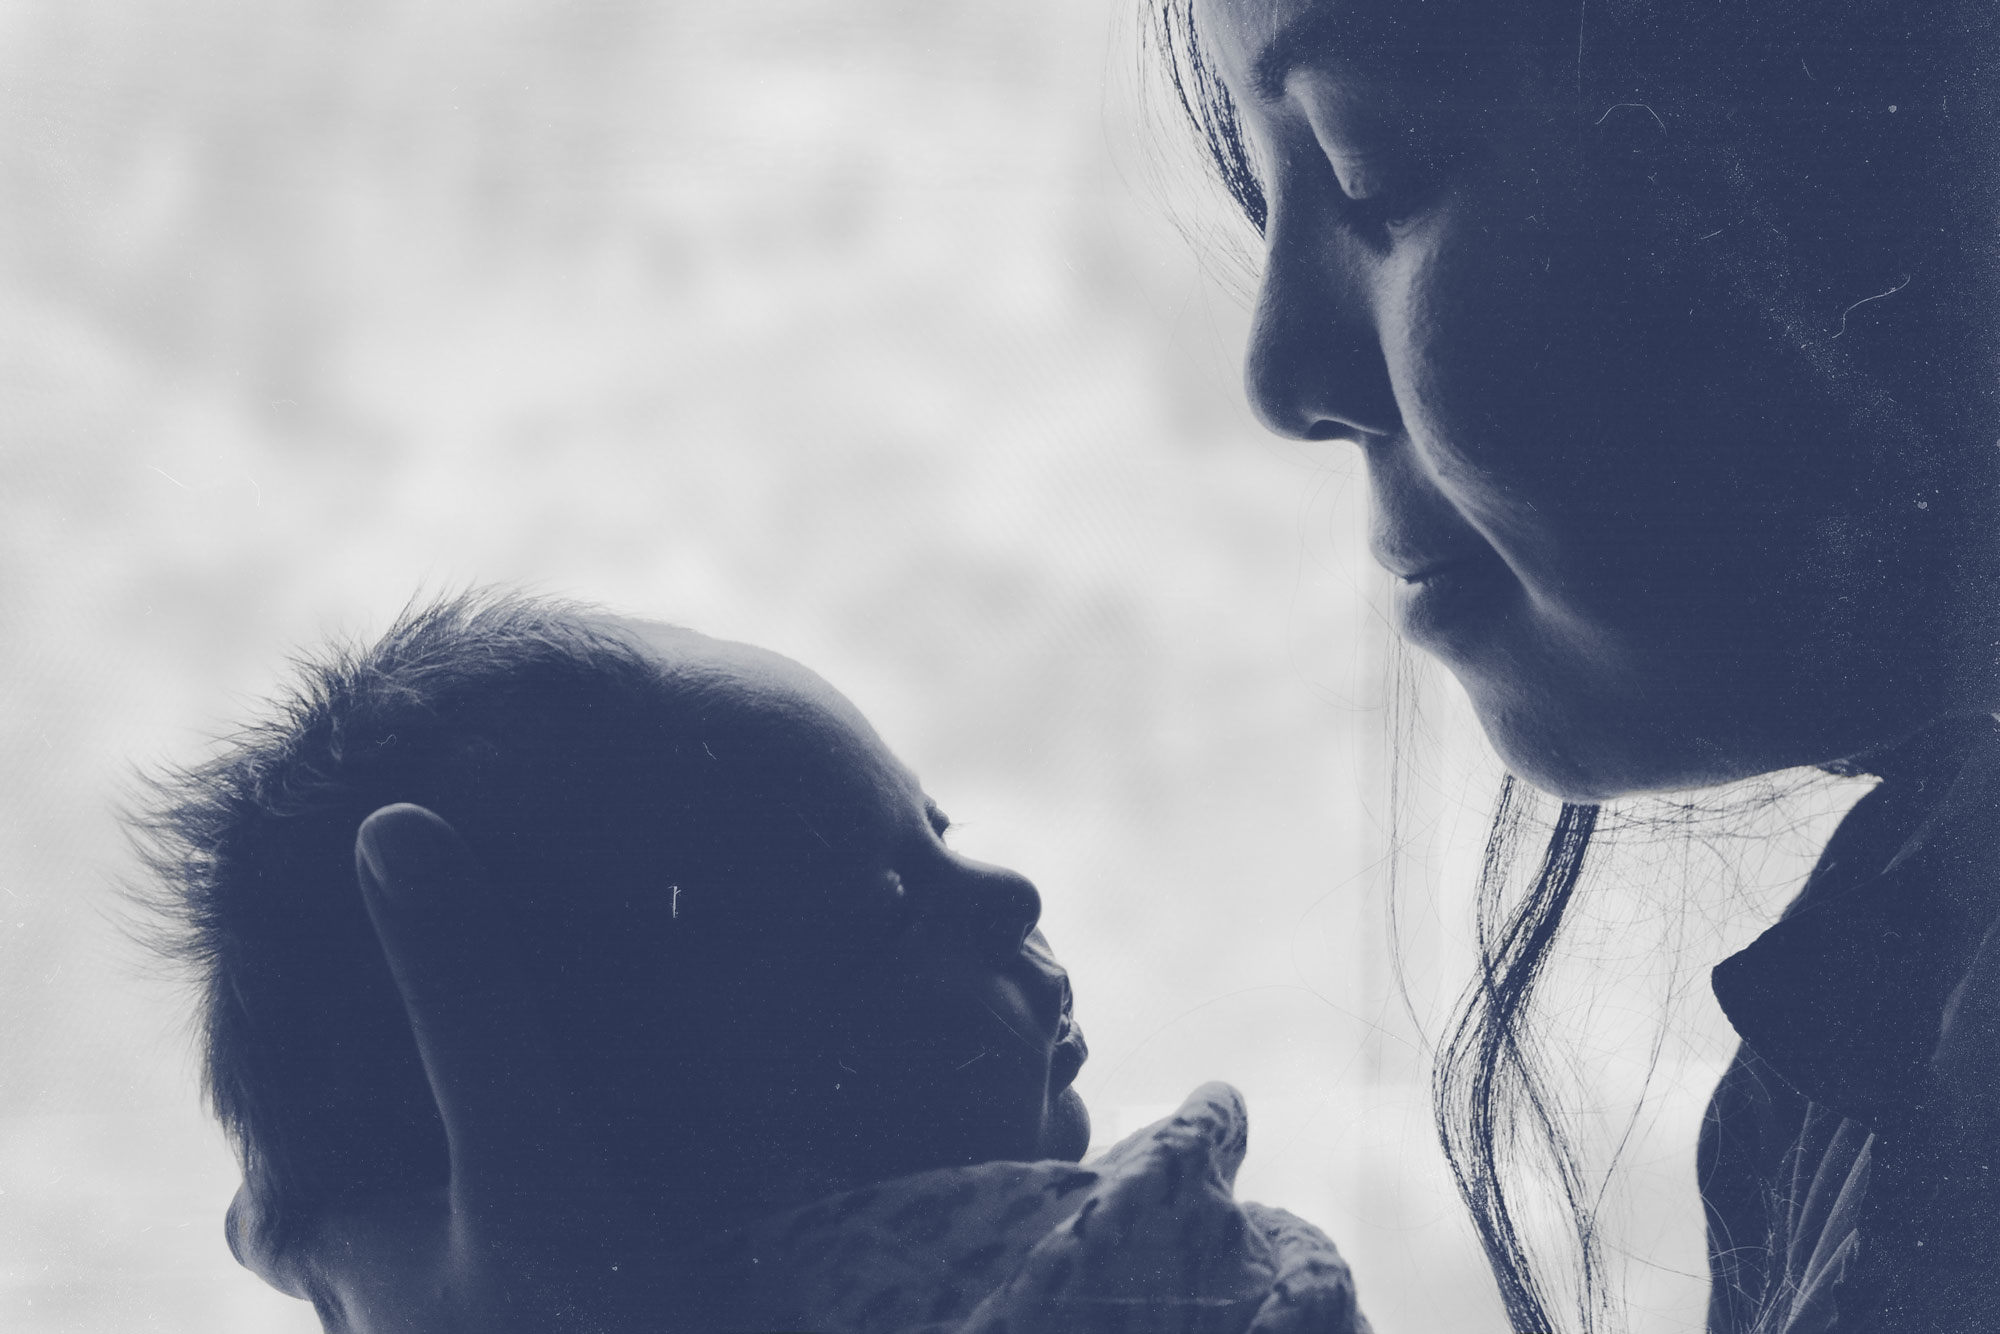 Mother holds her baby with a blue graphic color overlay on the image